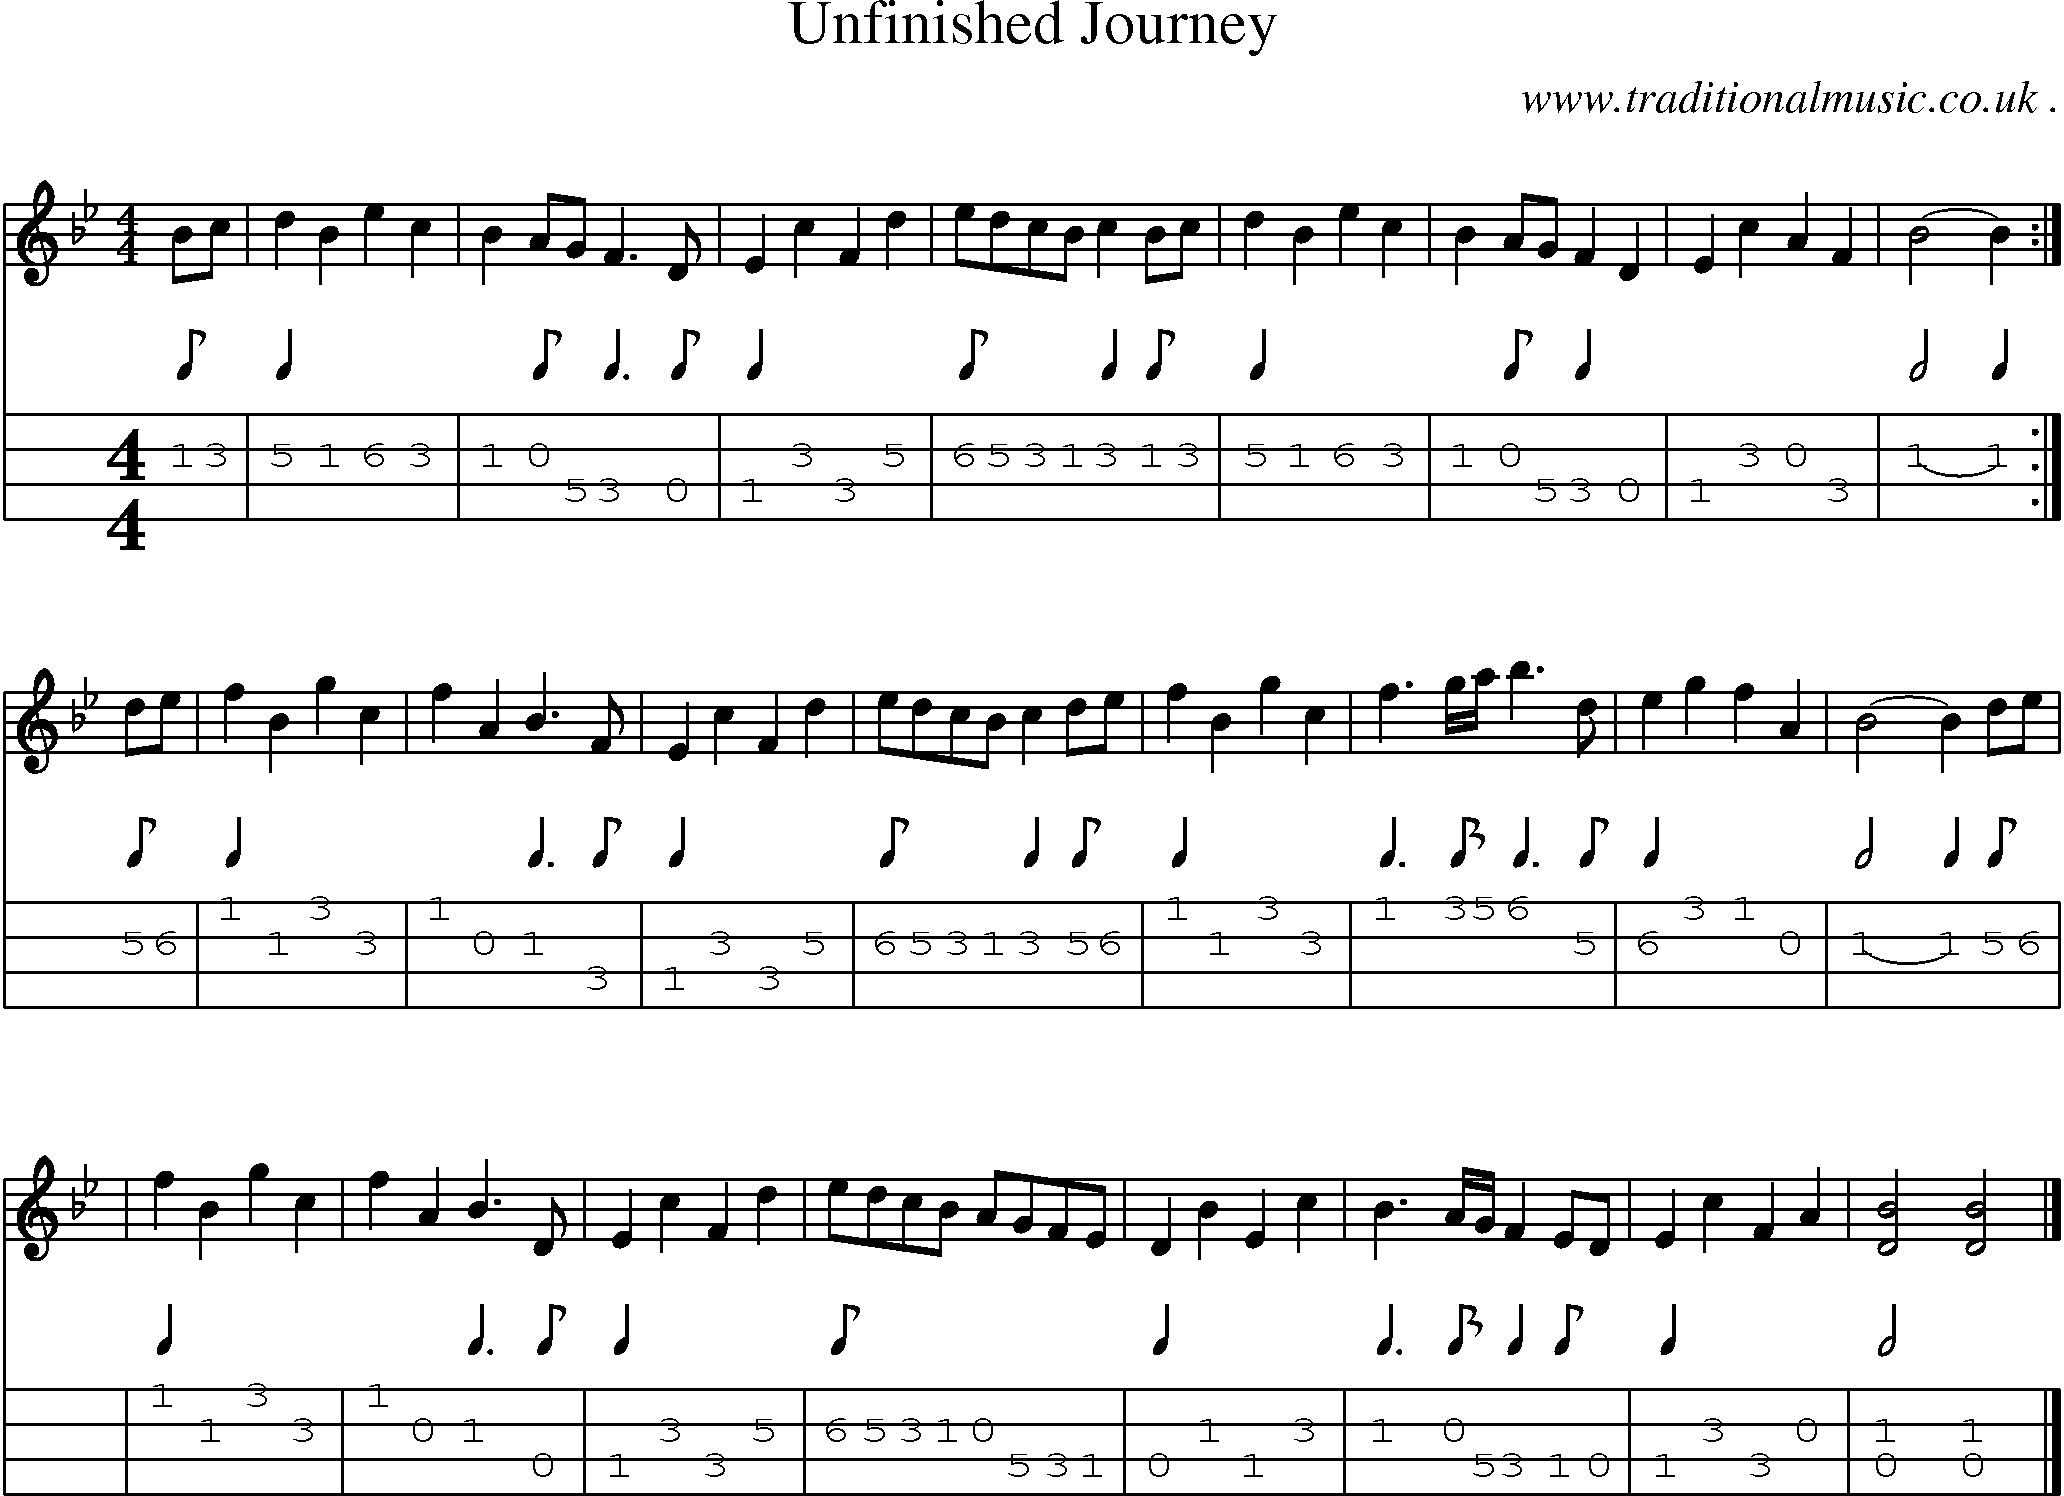 Sheet-music  score, Chords and Mandolin Tabs for Unfinished Journey